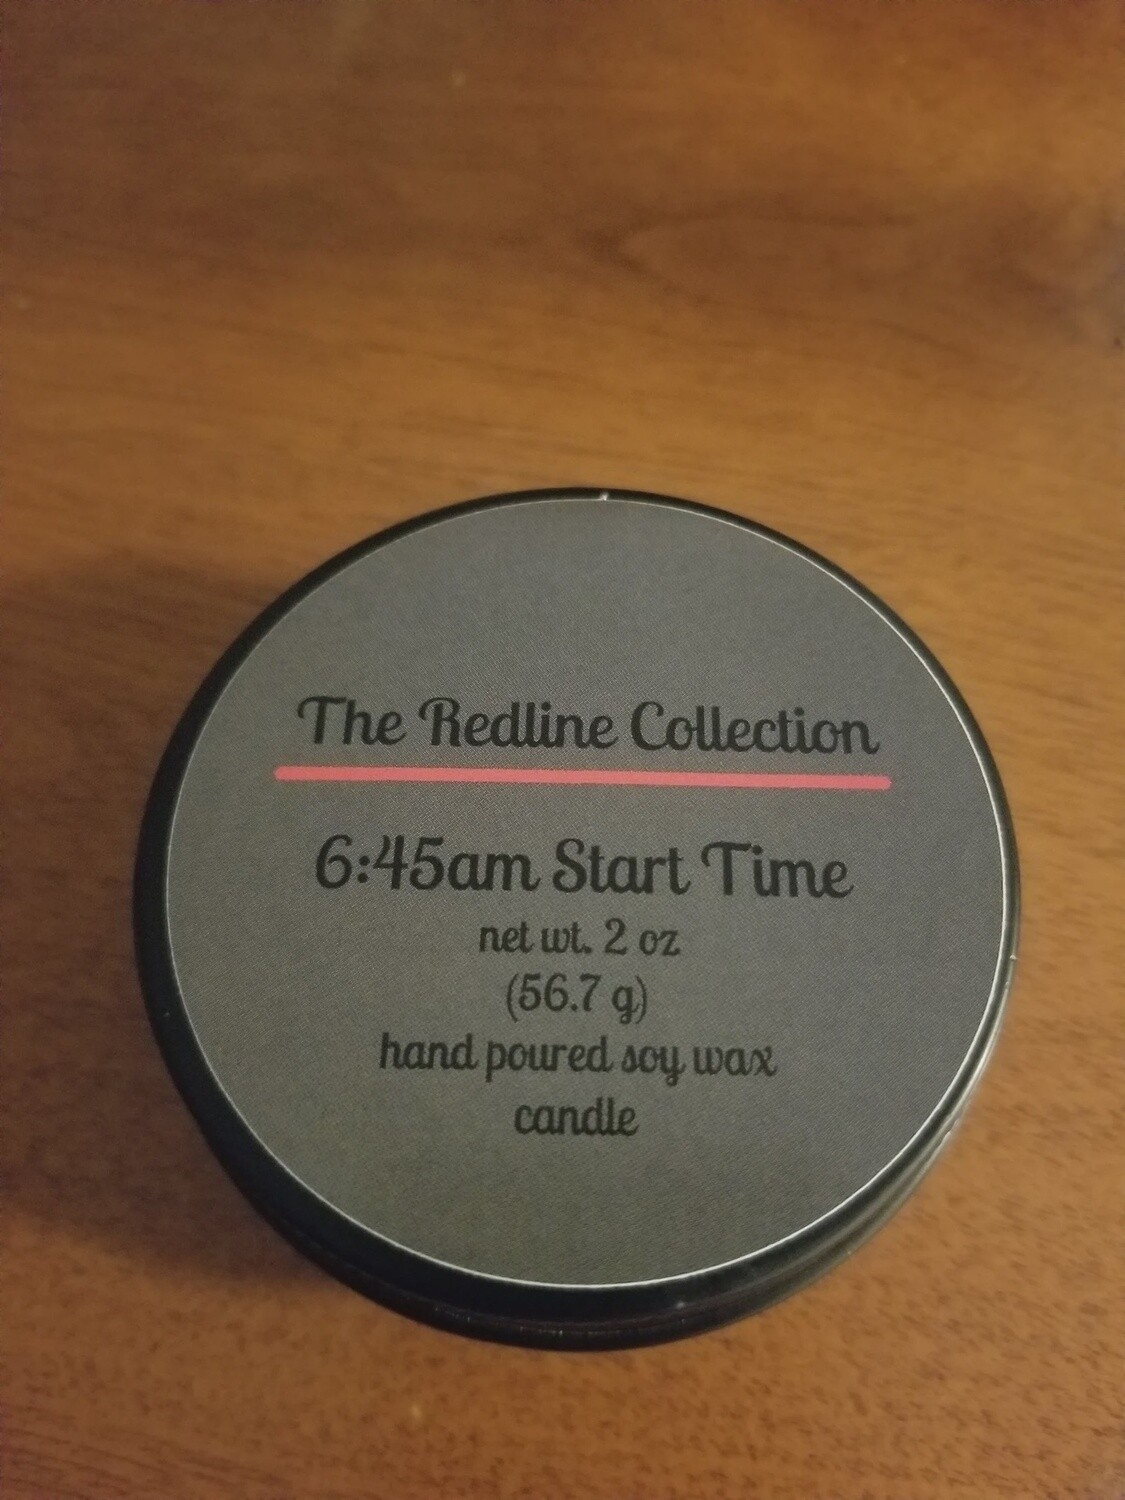 The Redline Collection &quot;6:45am Start Time&quot; 2 oz. Candle Tin